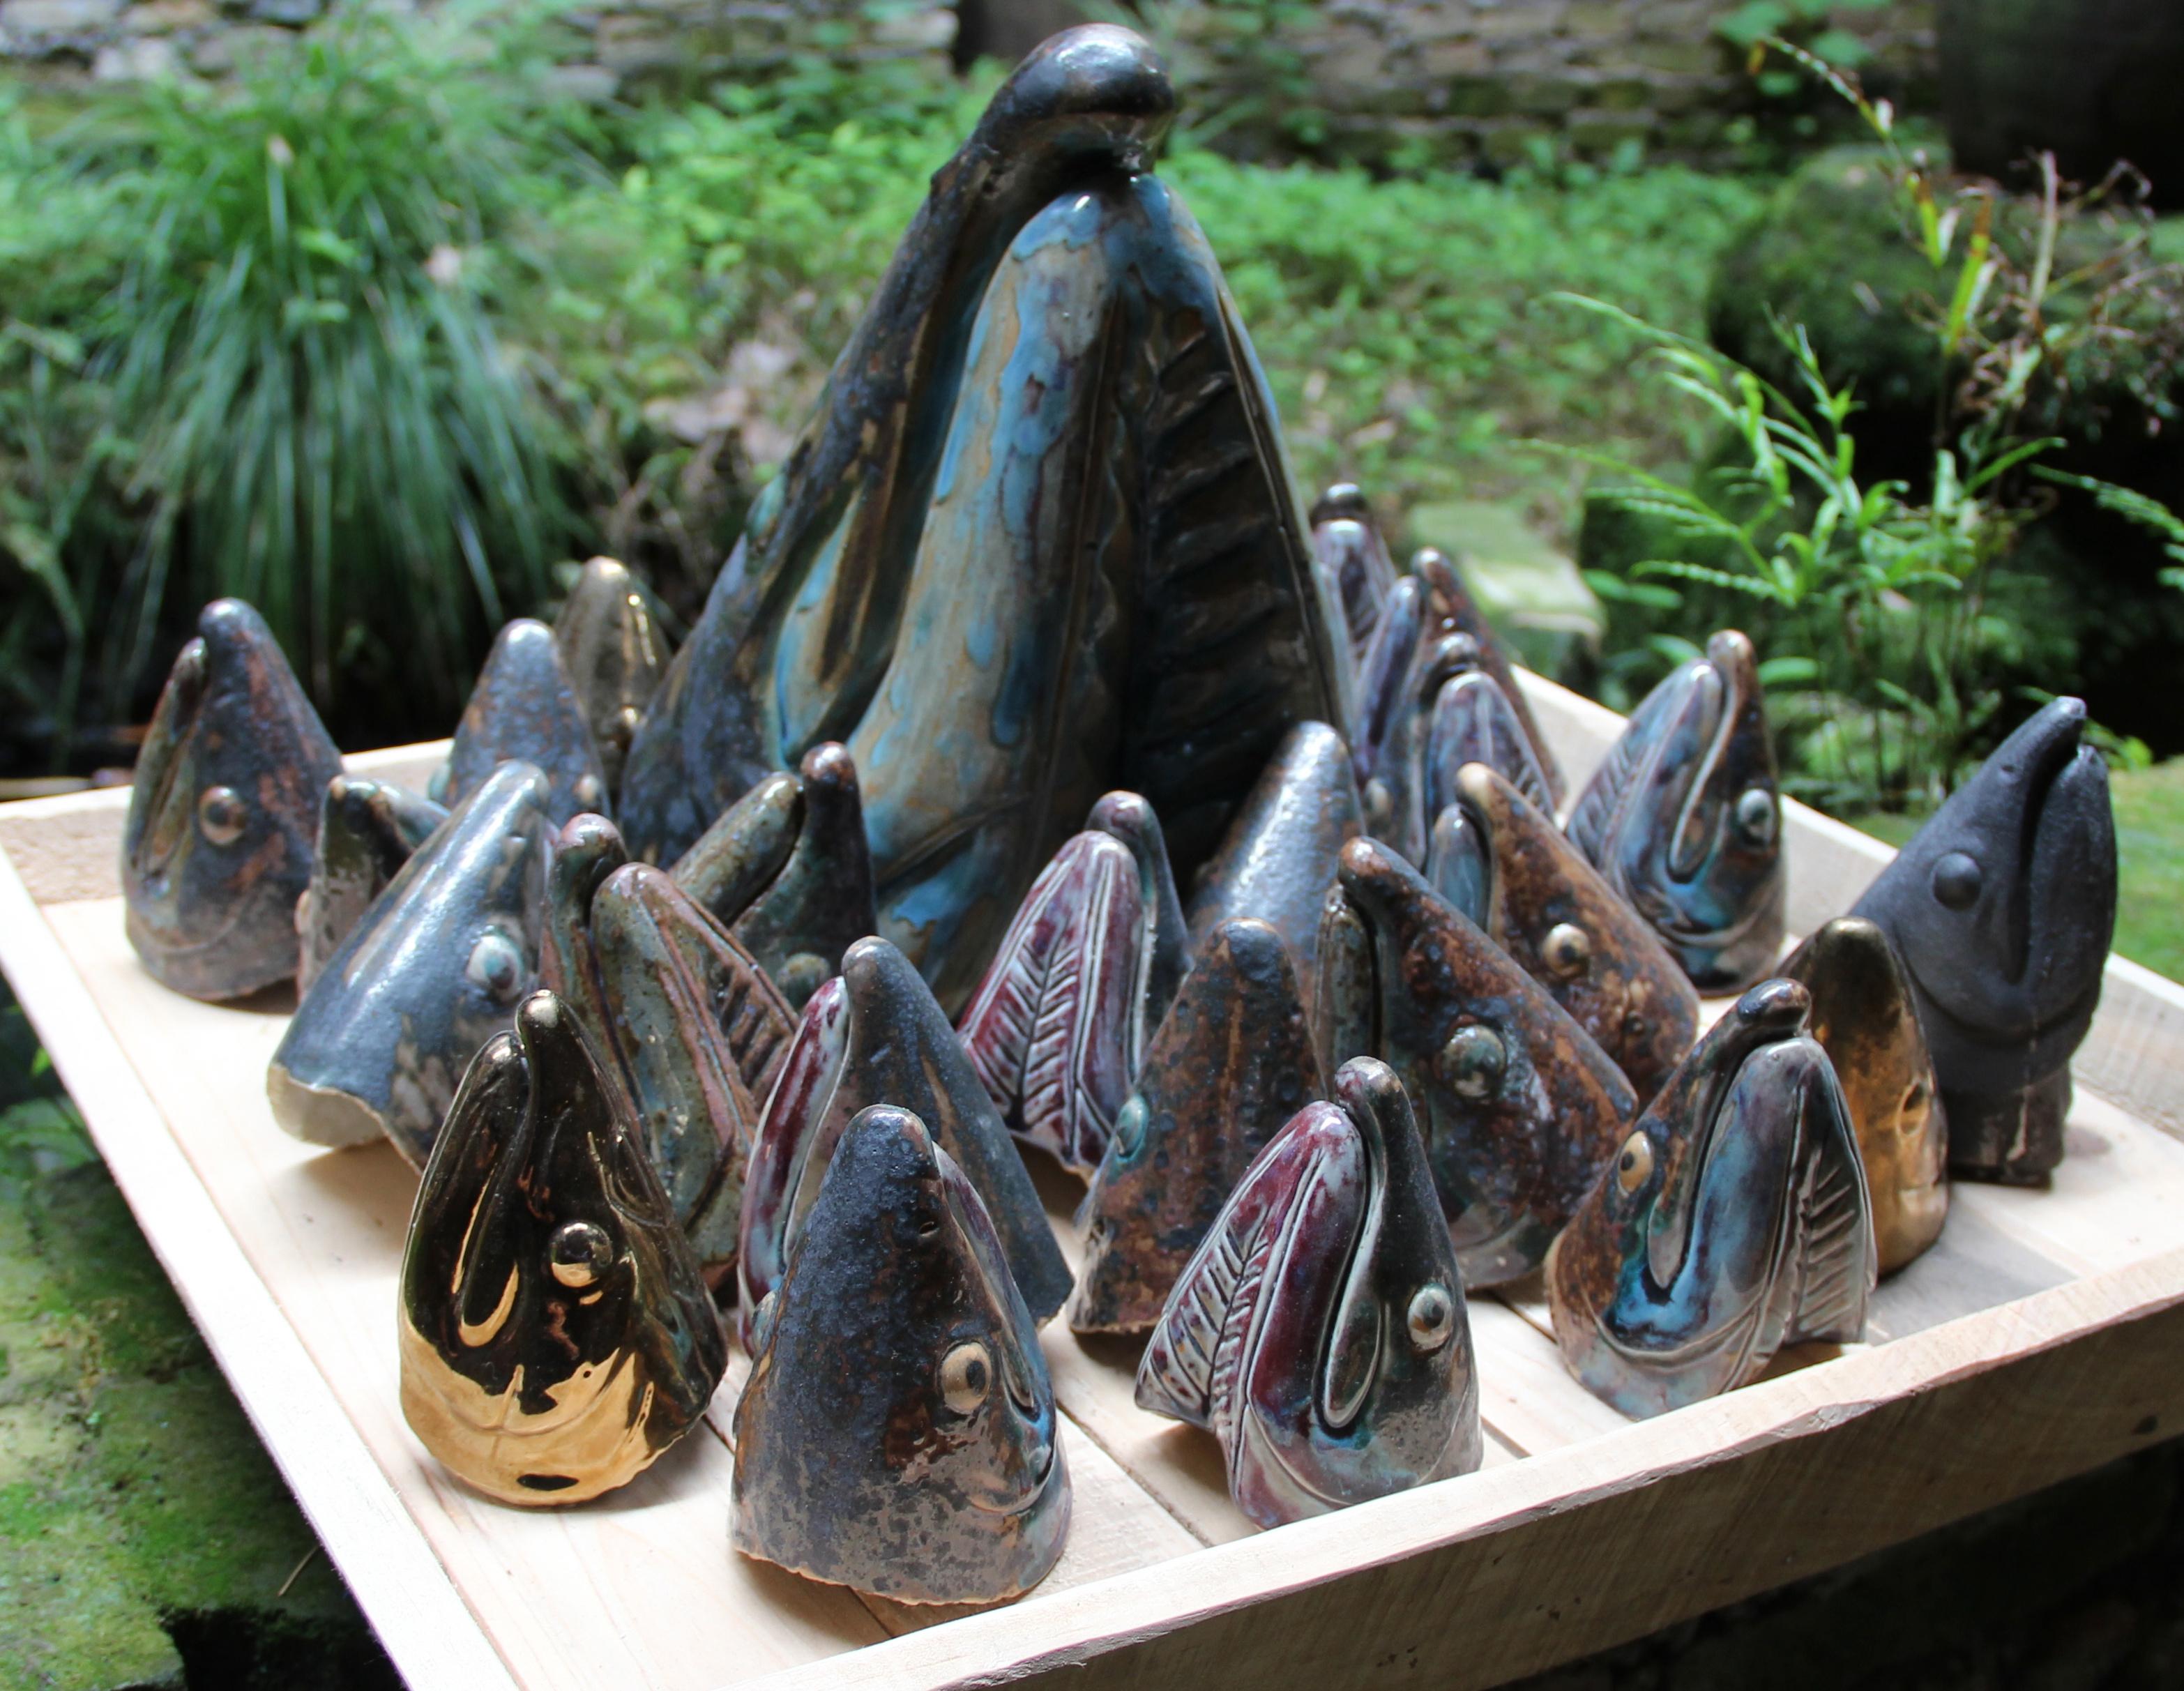 Many sculptures of fish heads sit on a surface.